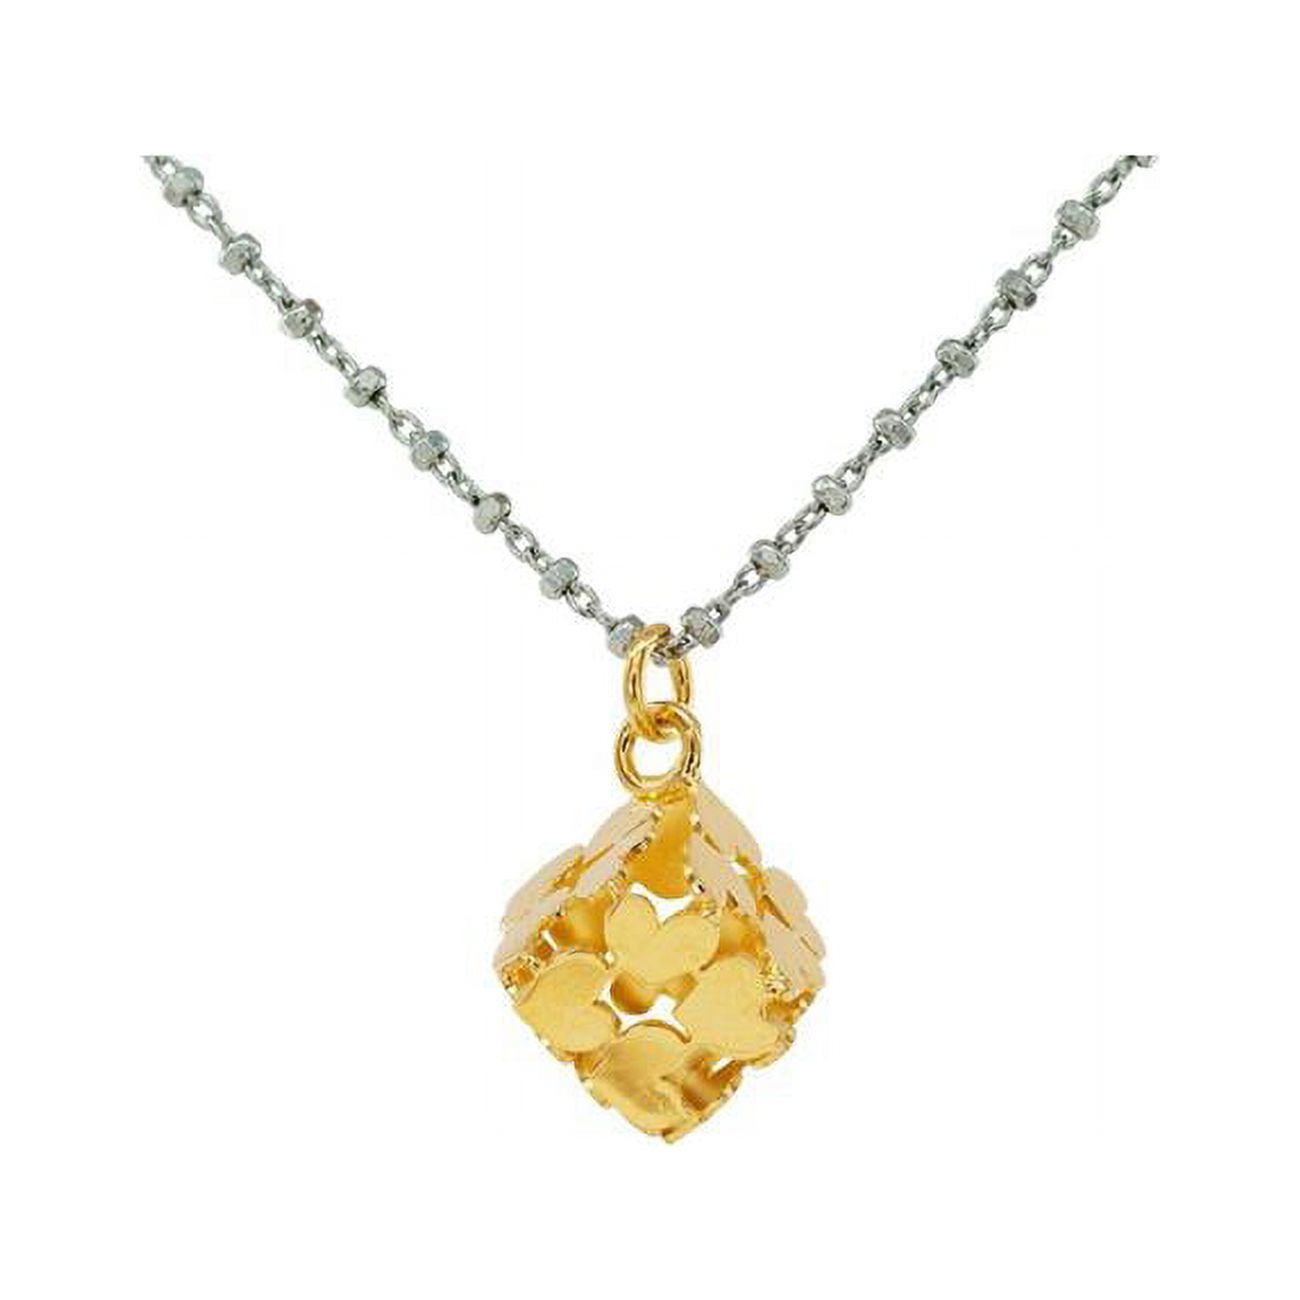 361105g 30 In. Lovers Cube Necklace